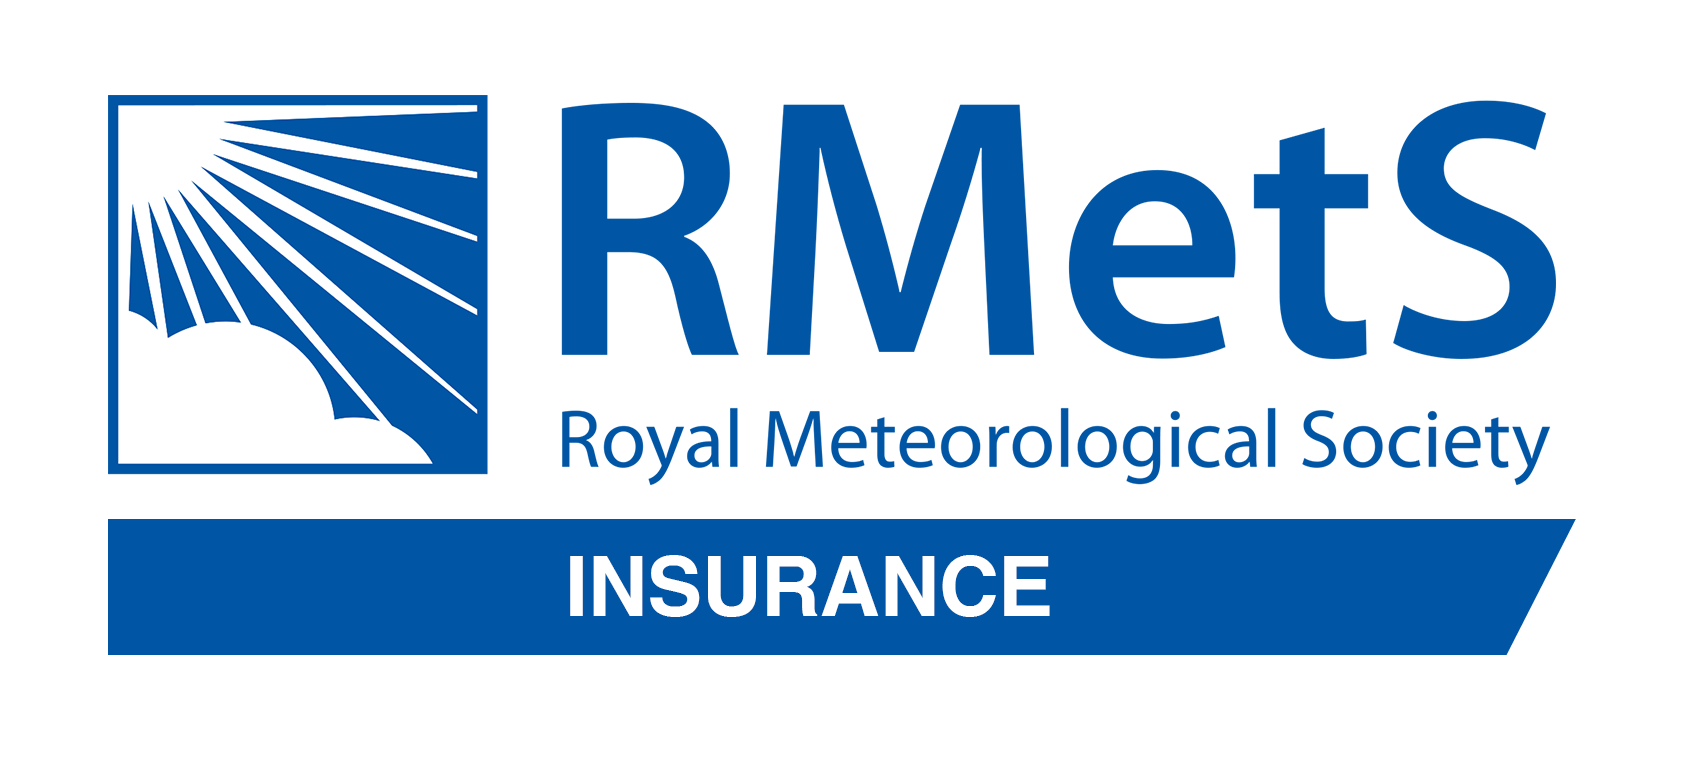 Royal Meteorological Society Insurance Special Interest Group logo